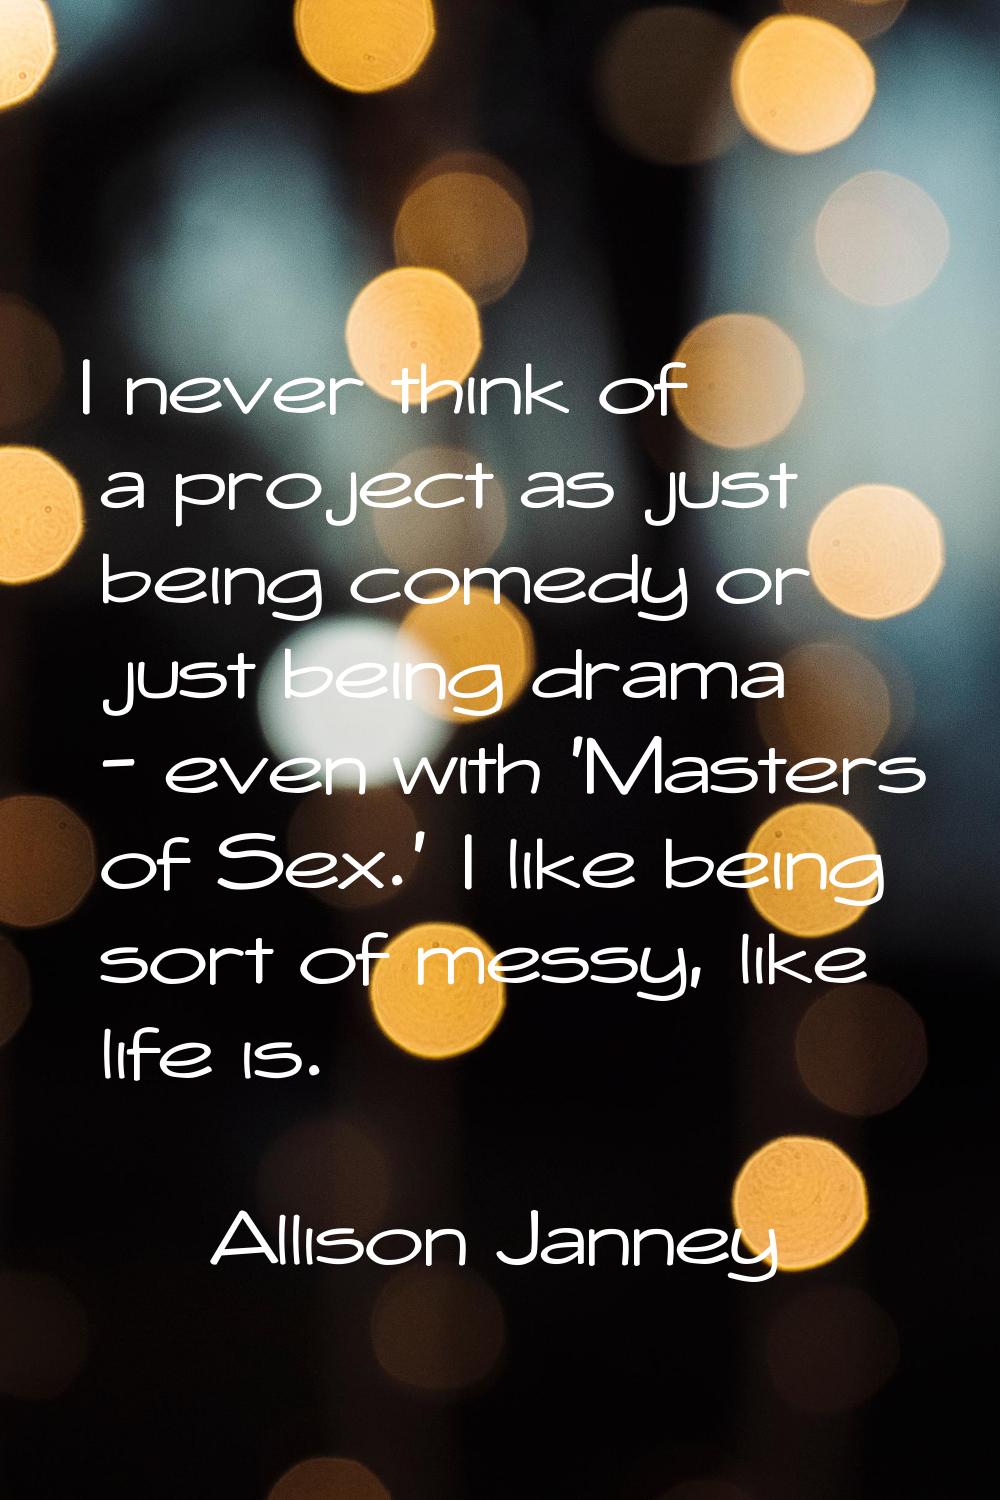 I never think of a project as just being comedy or just being drama - even with 'Masters of Sex.' I